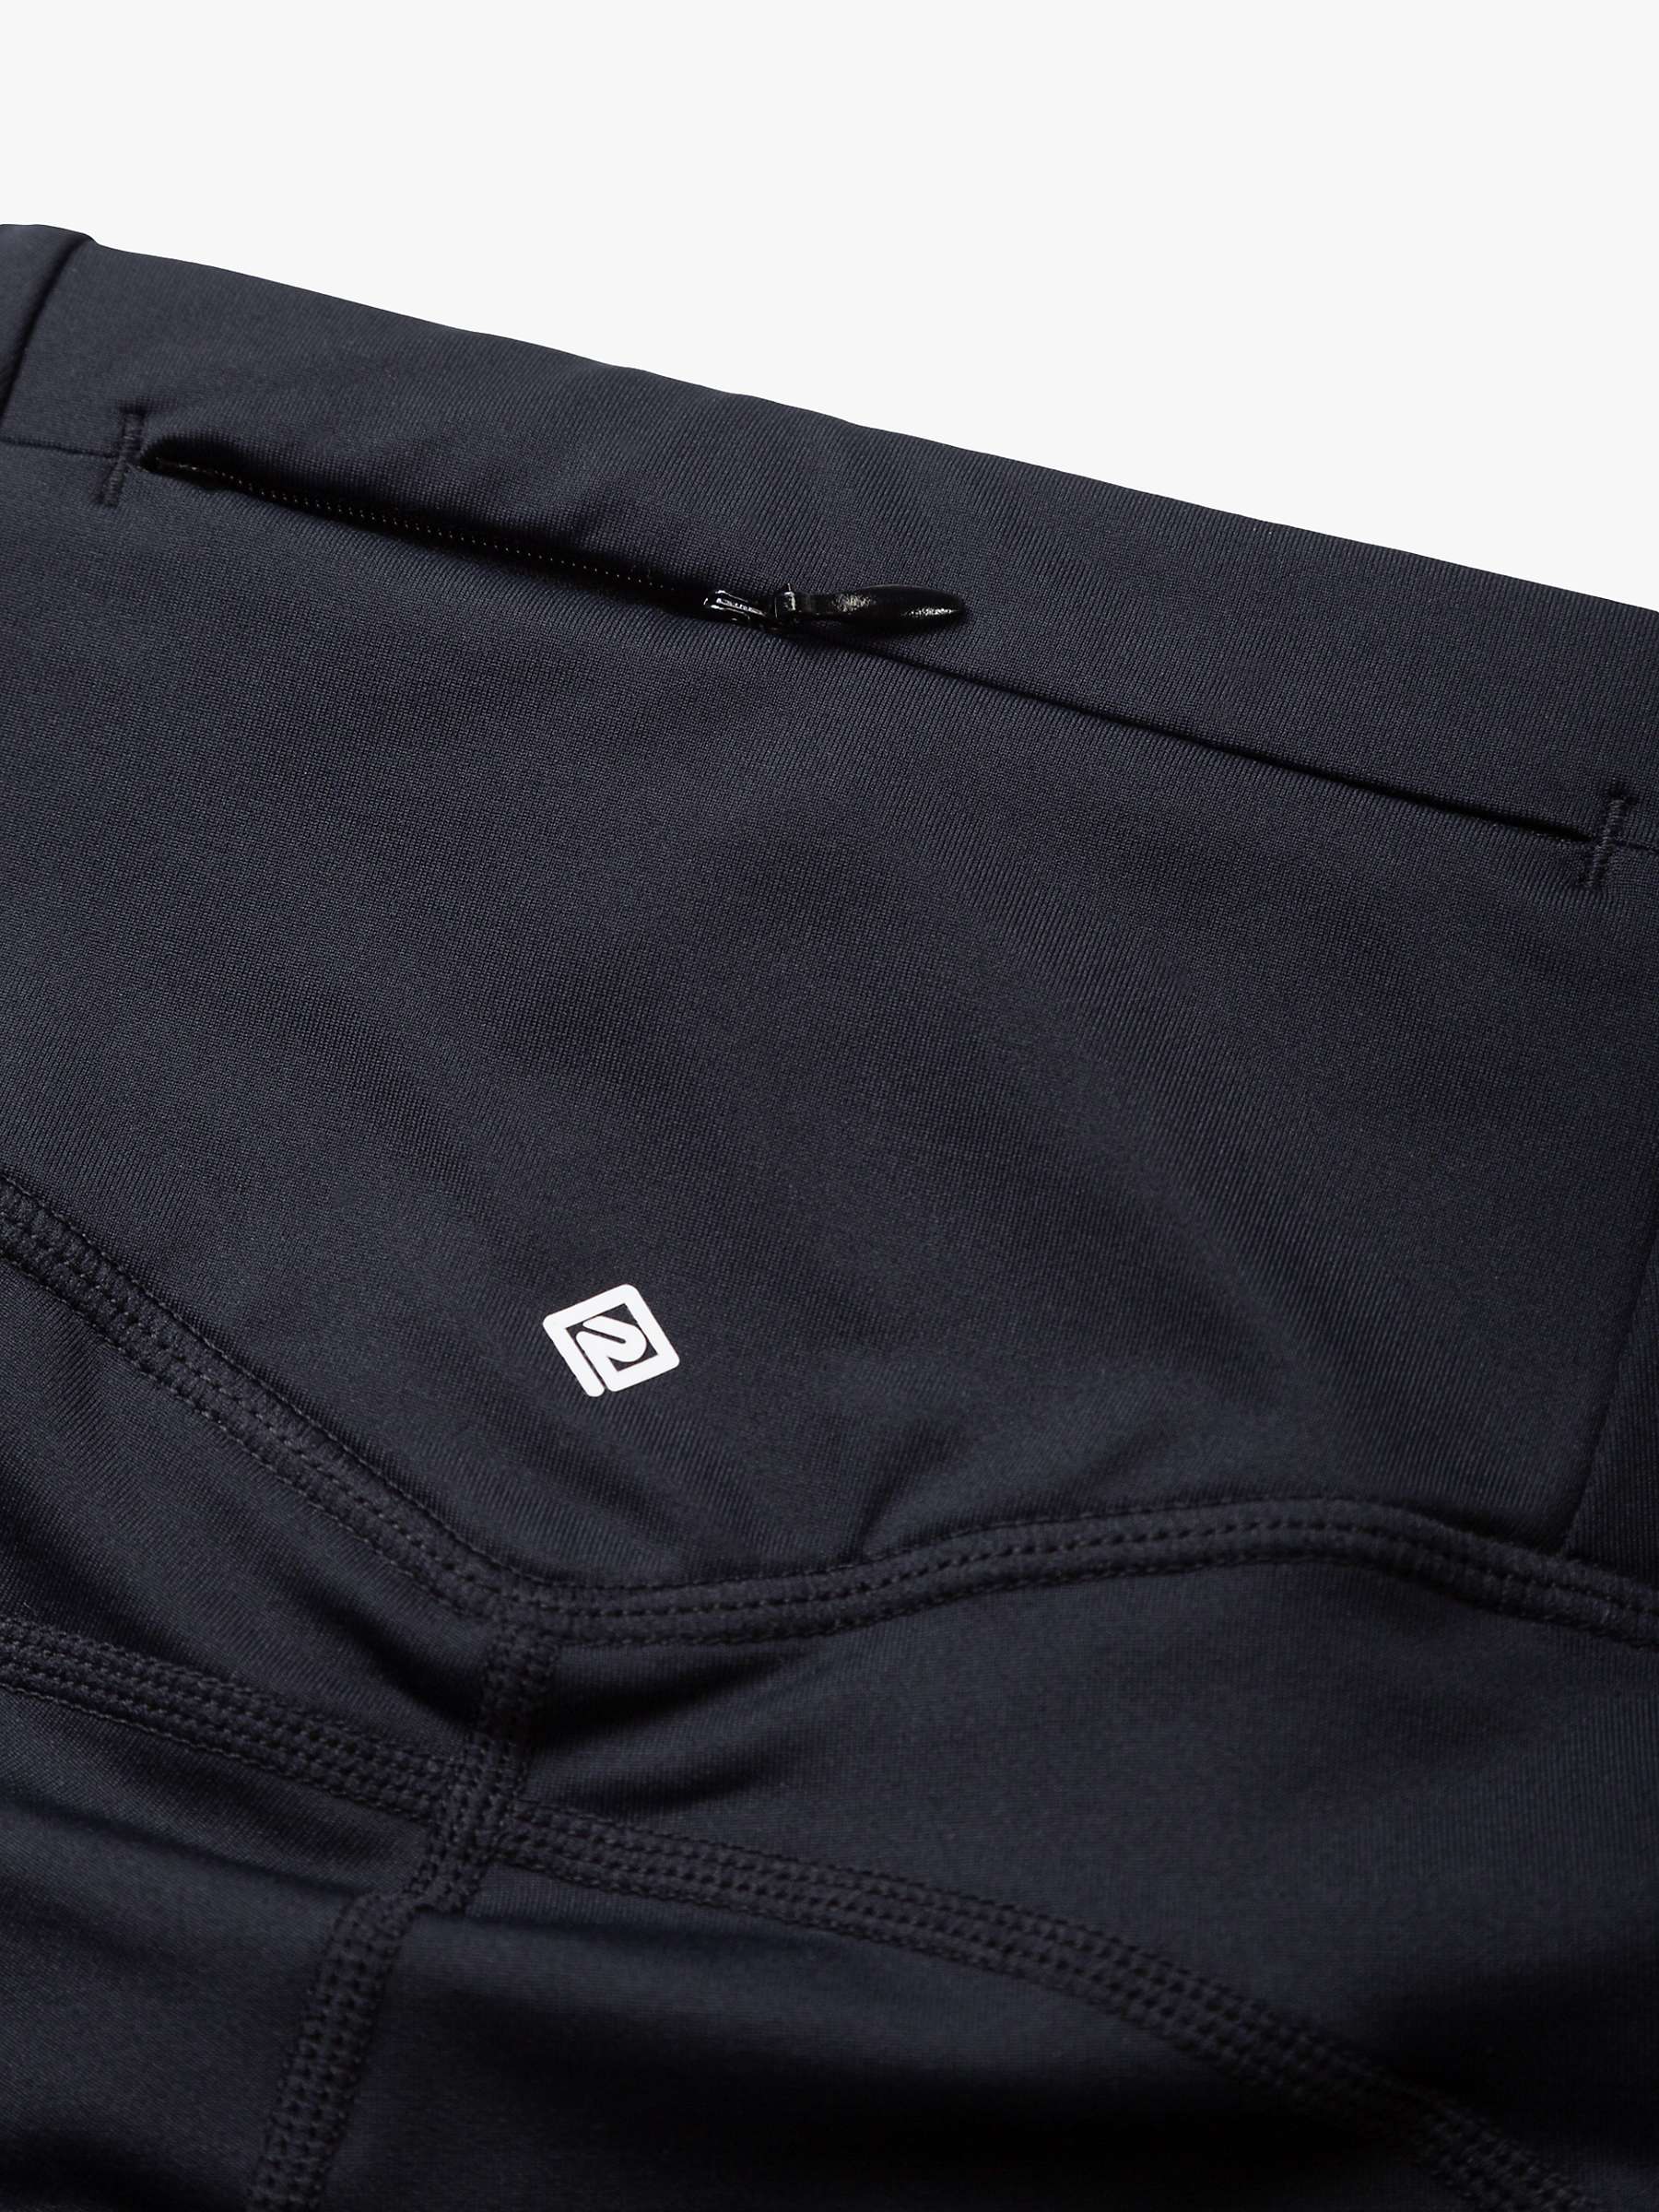 Buy Ronhill Stretch Breathable Sports Shorts, Black Online at johnlewis.com